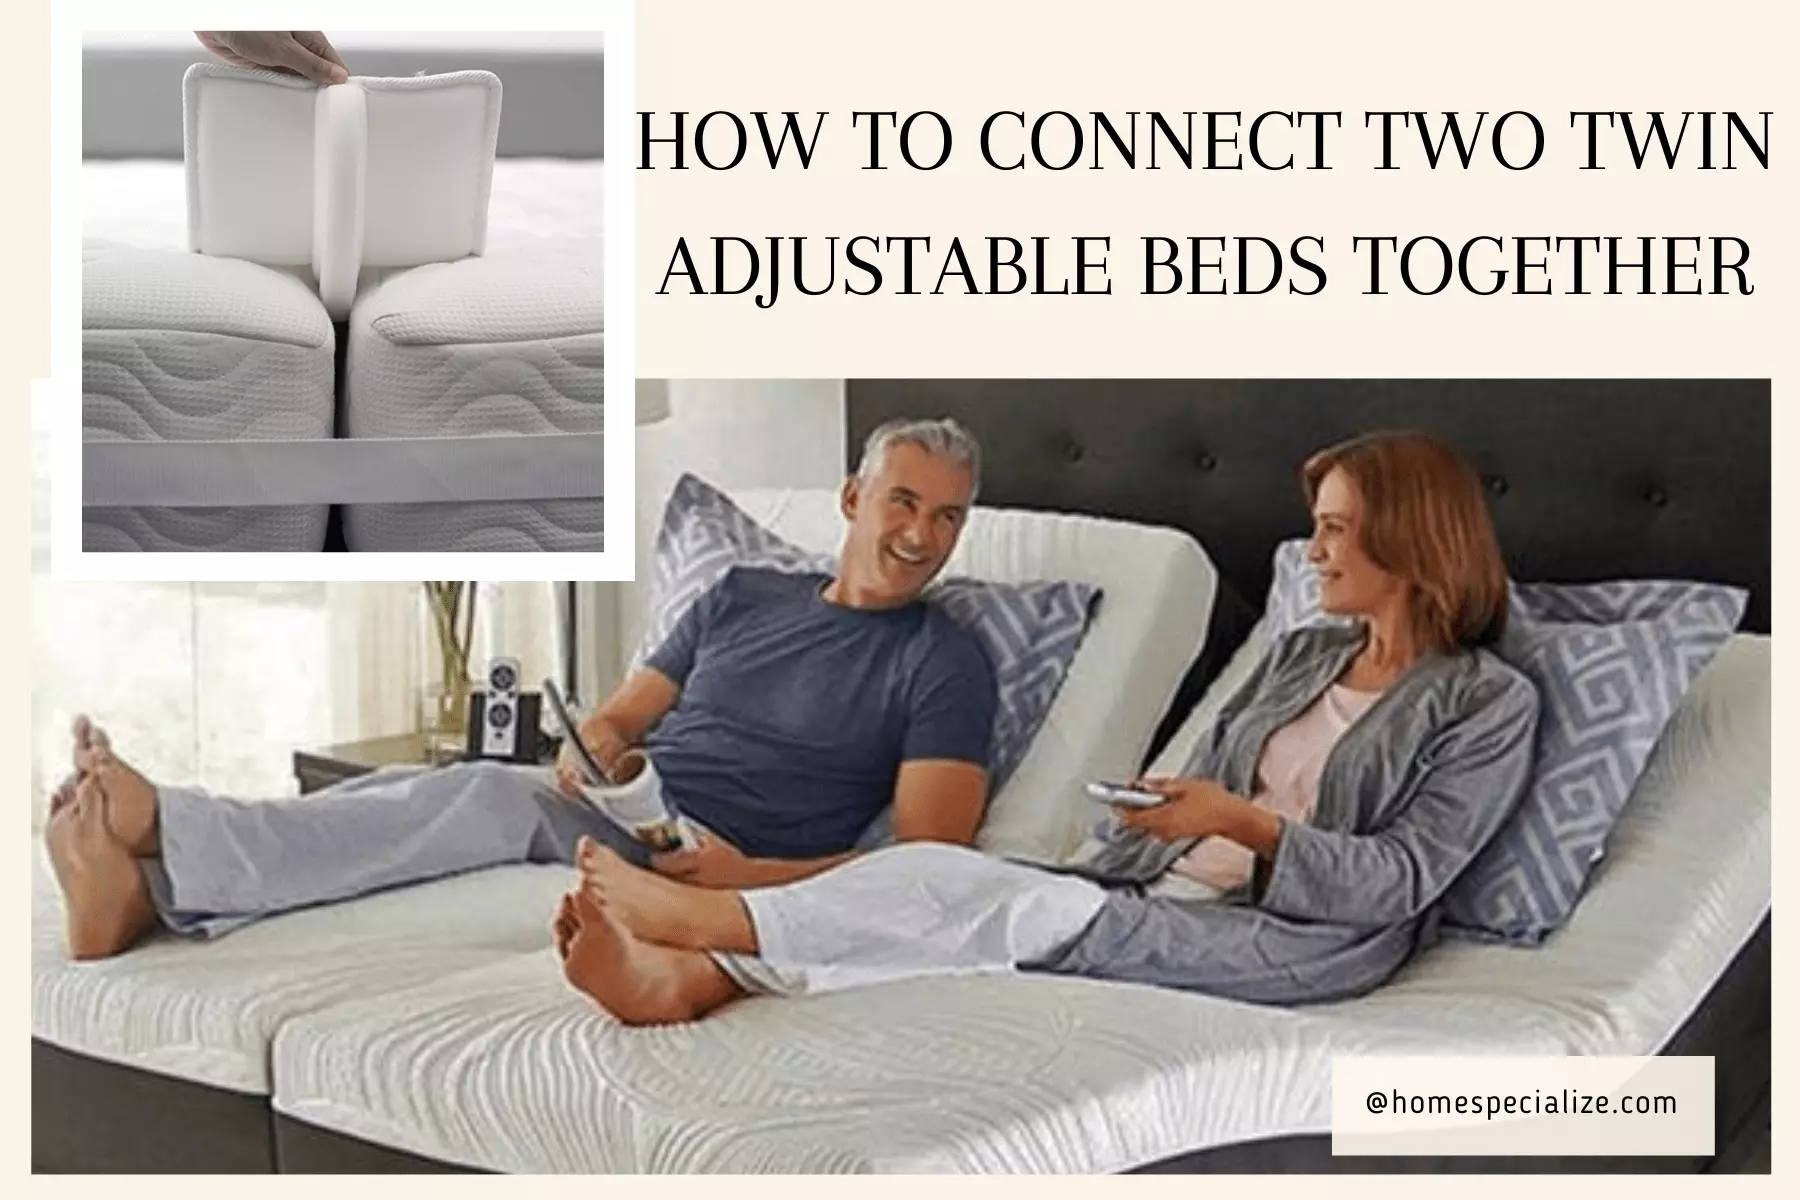 How to Connect Two Twin Adjustable Beds Together